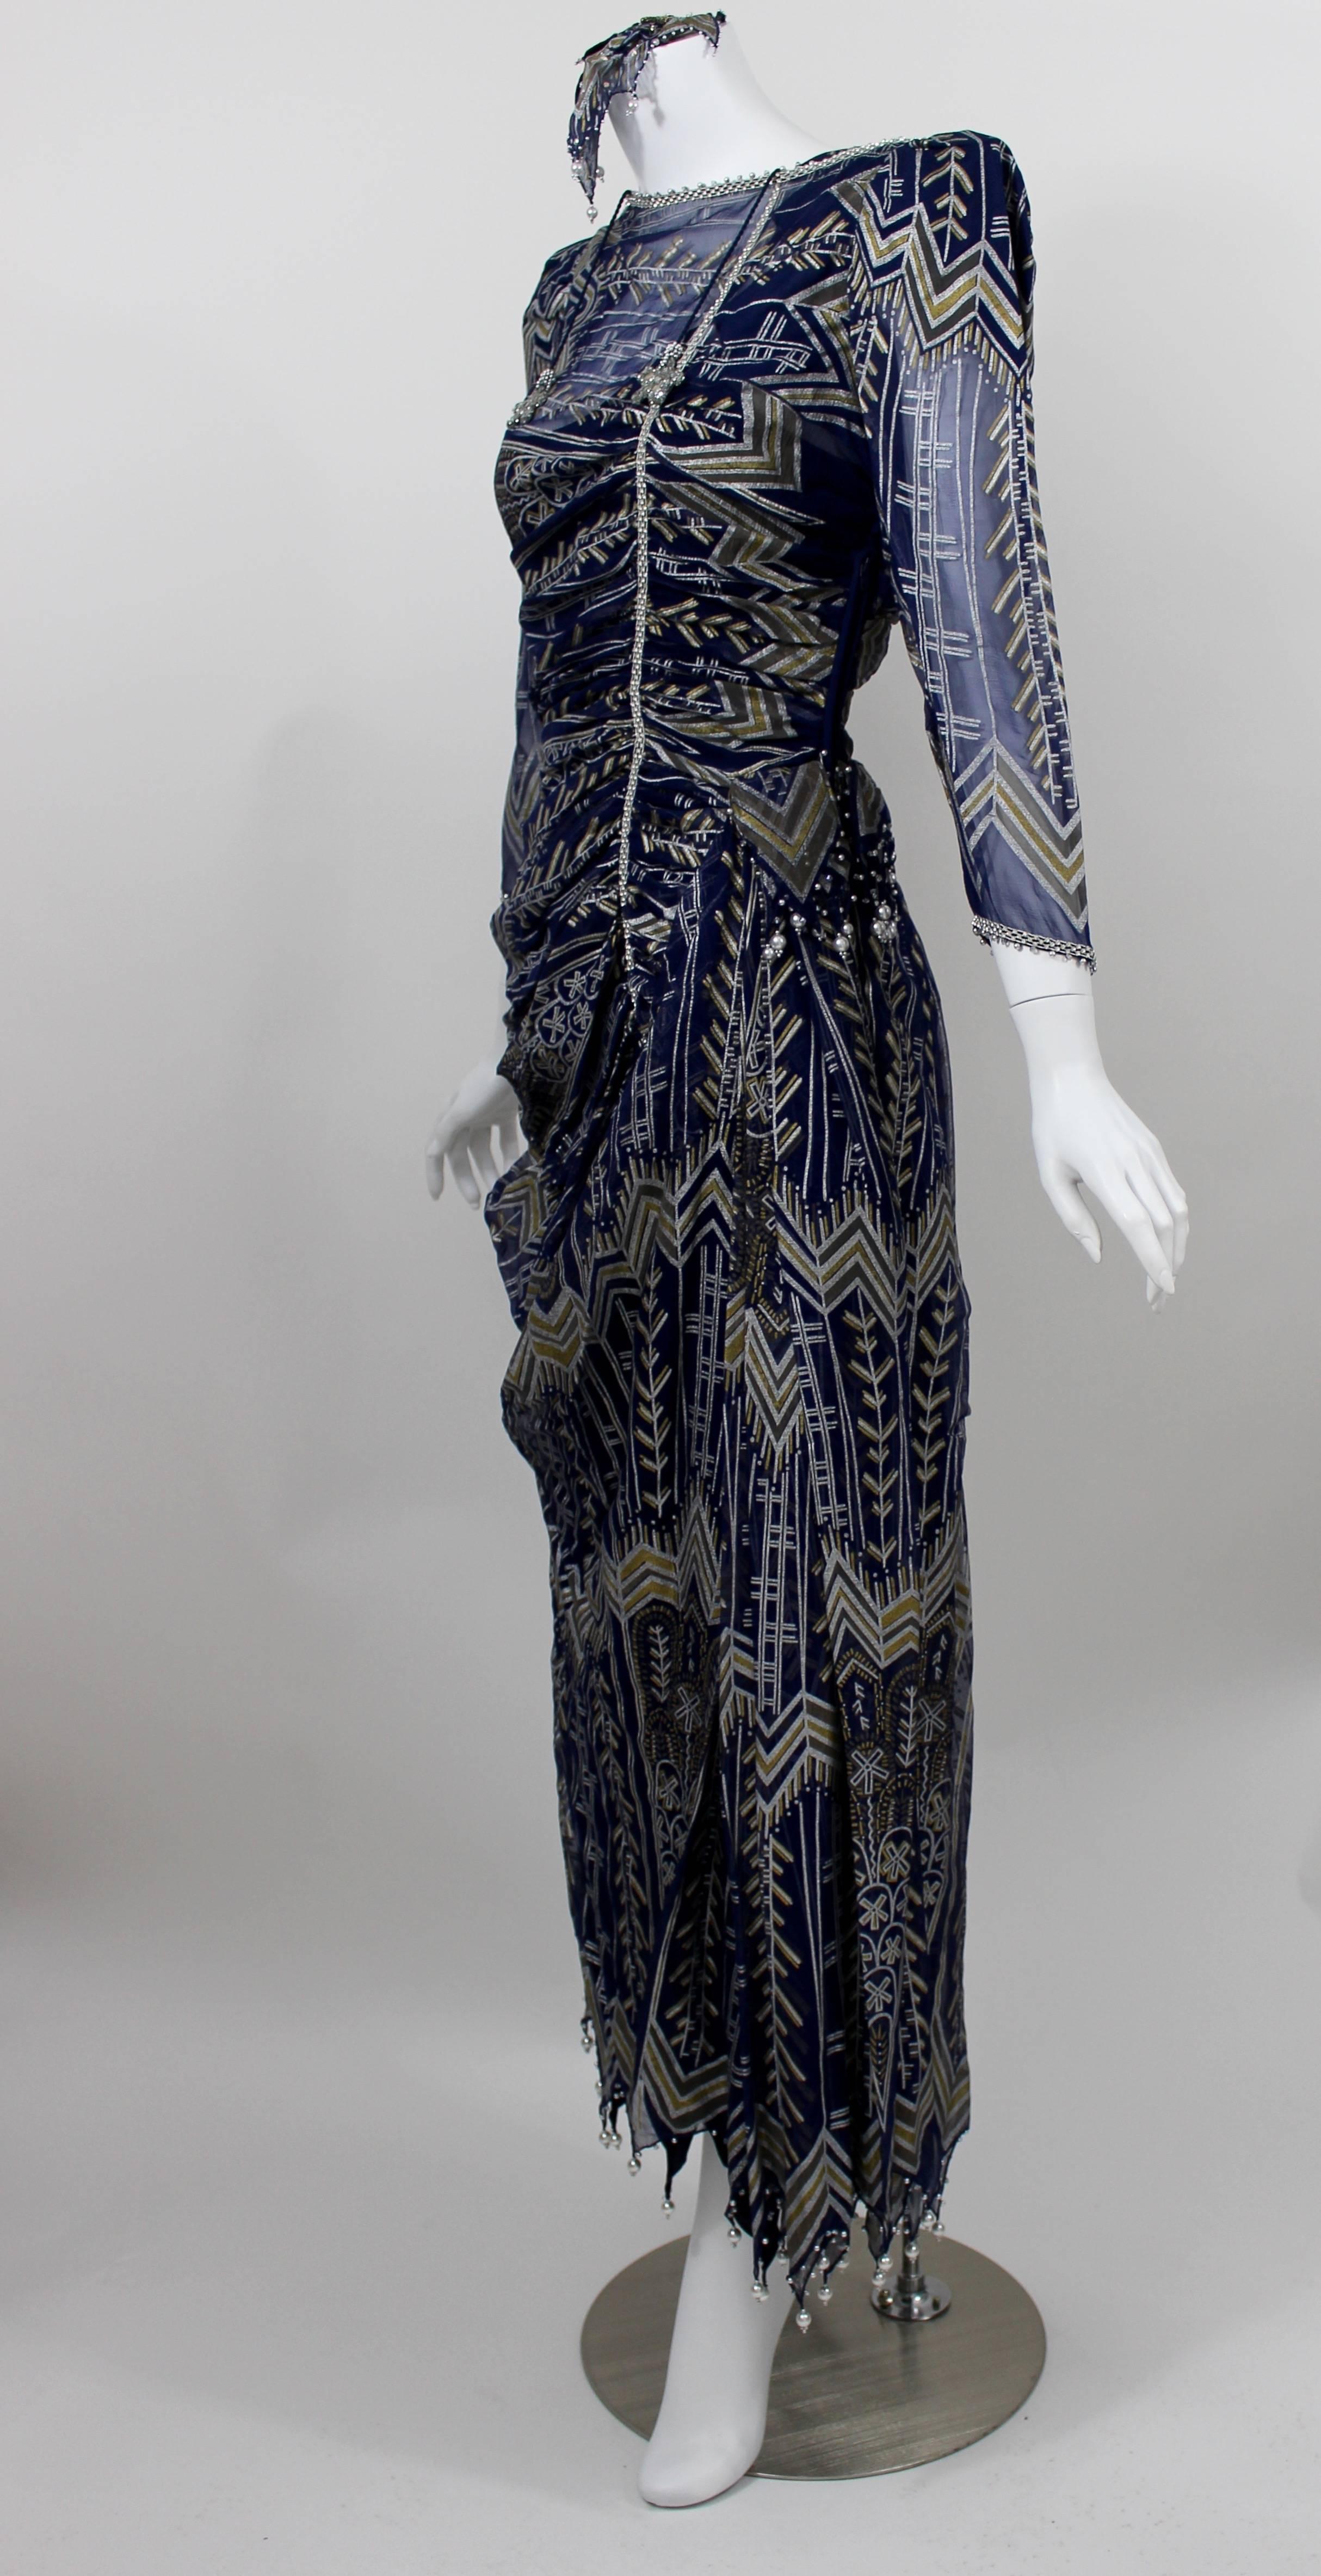 This Dress from Zandra Rhodes is fashioned from a hand painted navy blue  sheer silk chiffon.

Rhinestone and hand sewn pearl accents detail the dress.

Draping around the middle of the dress is figure flattering, and slimming.

A matching midnight